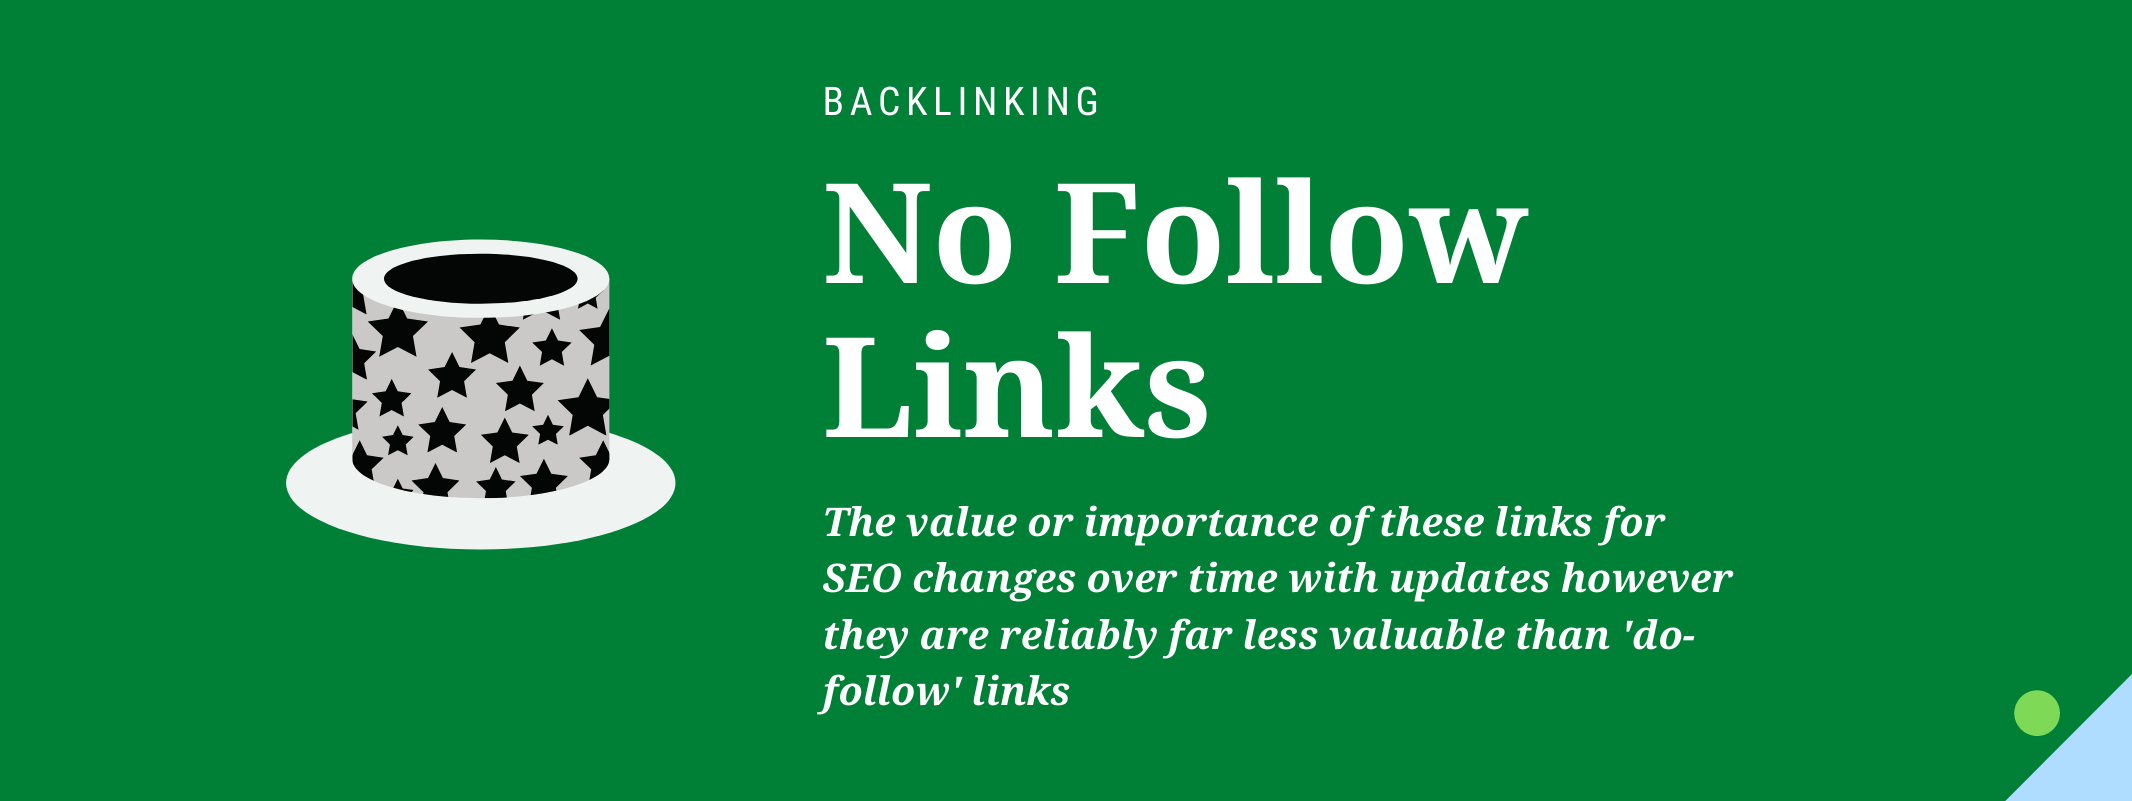 what is a dofollowlink